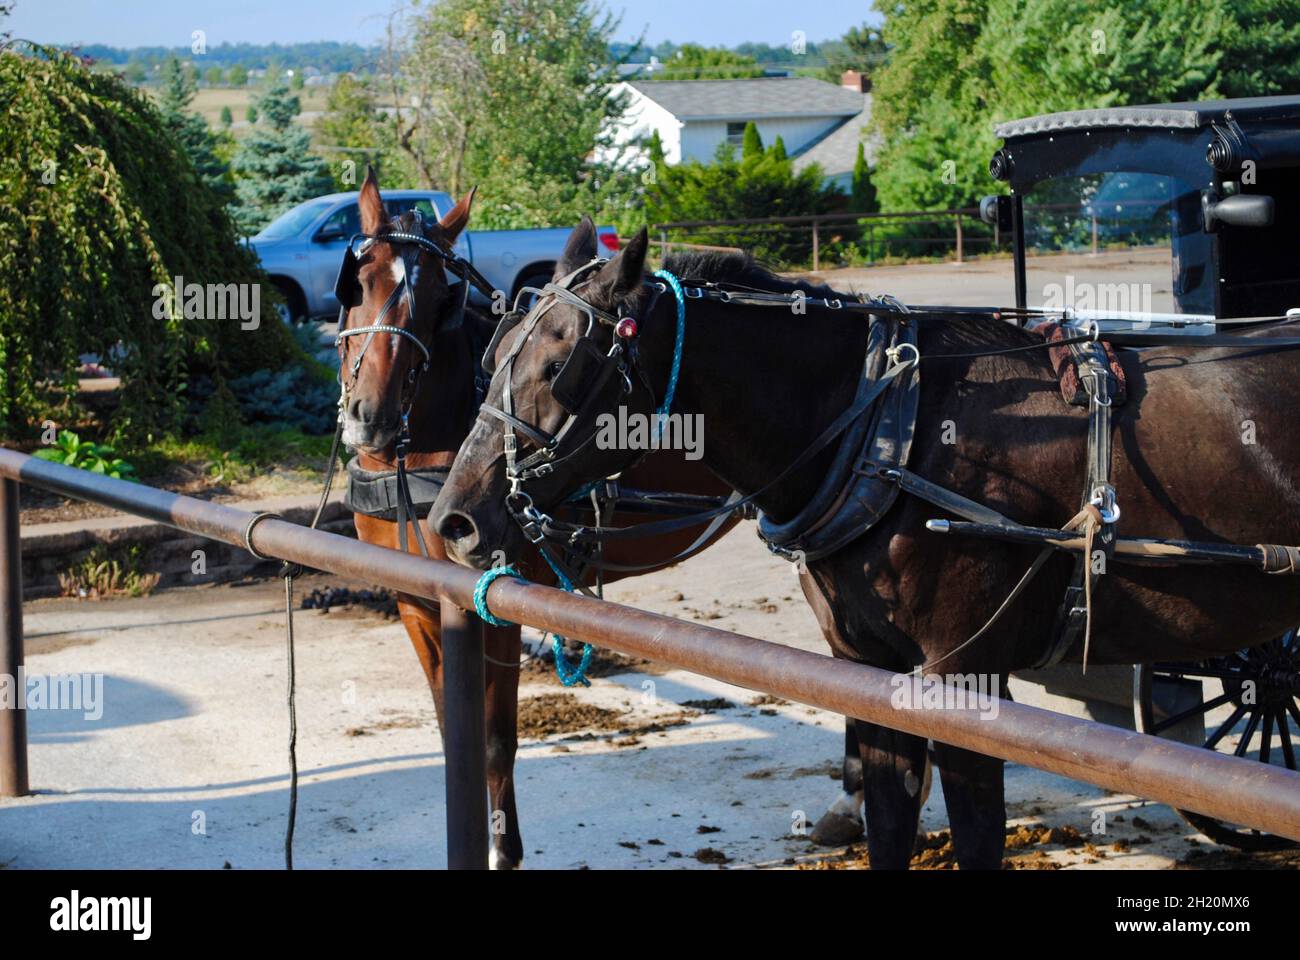 Horses and carridges at the Amish country in Ohio,USA Stock Photo